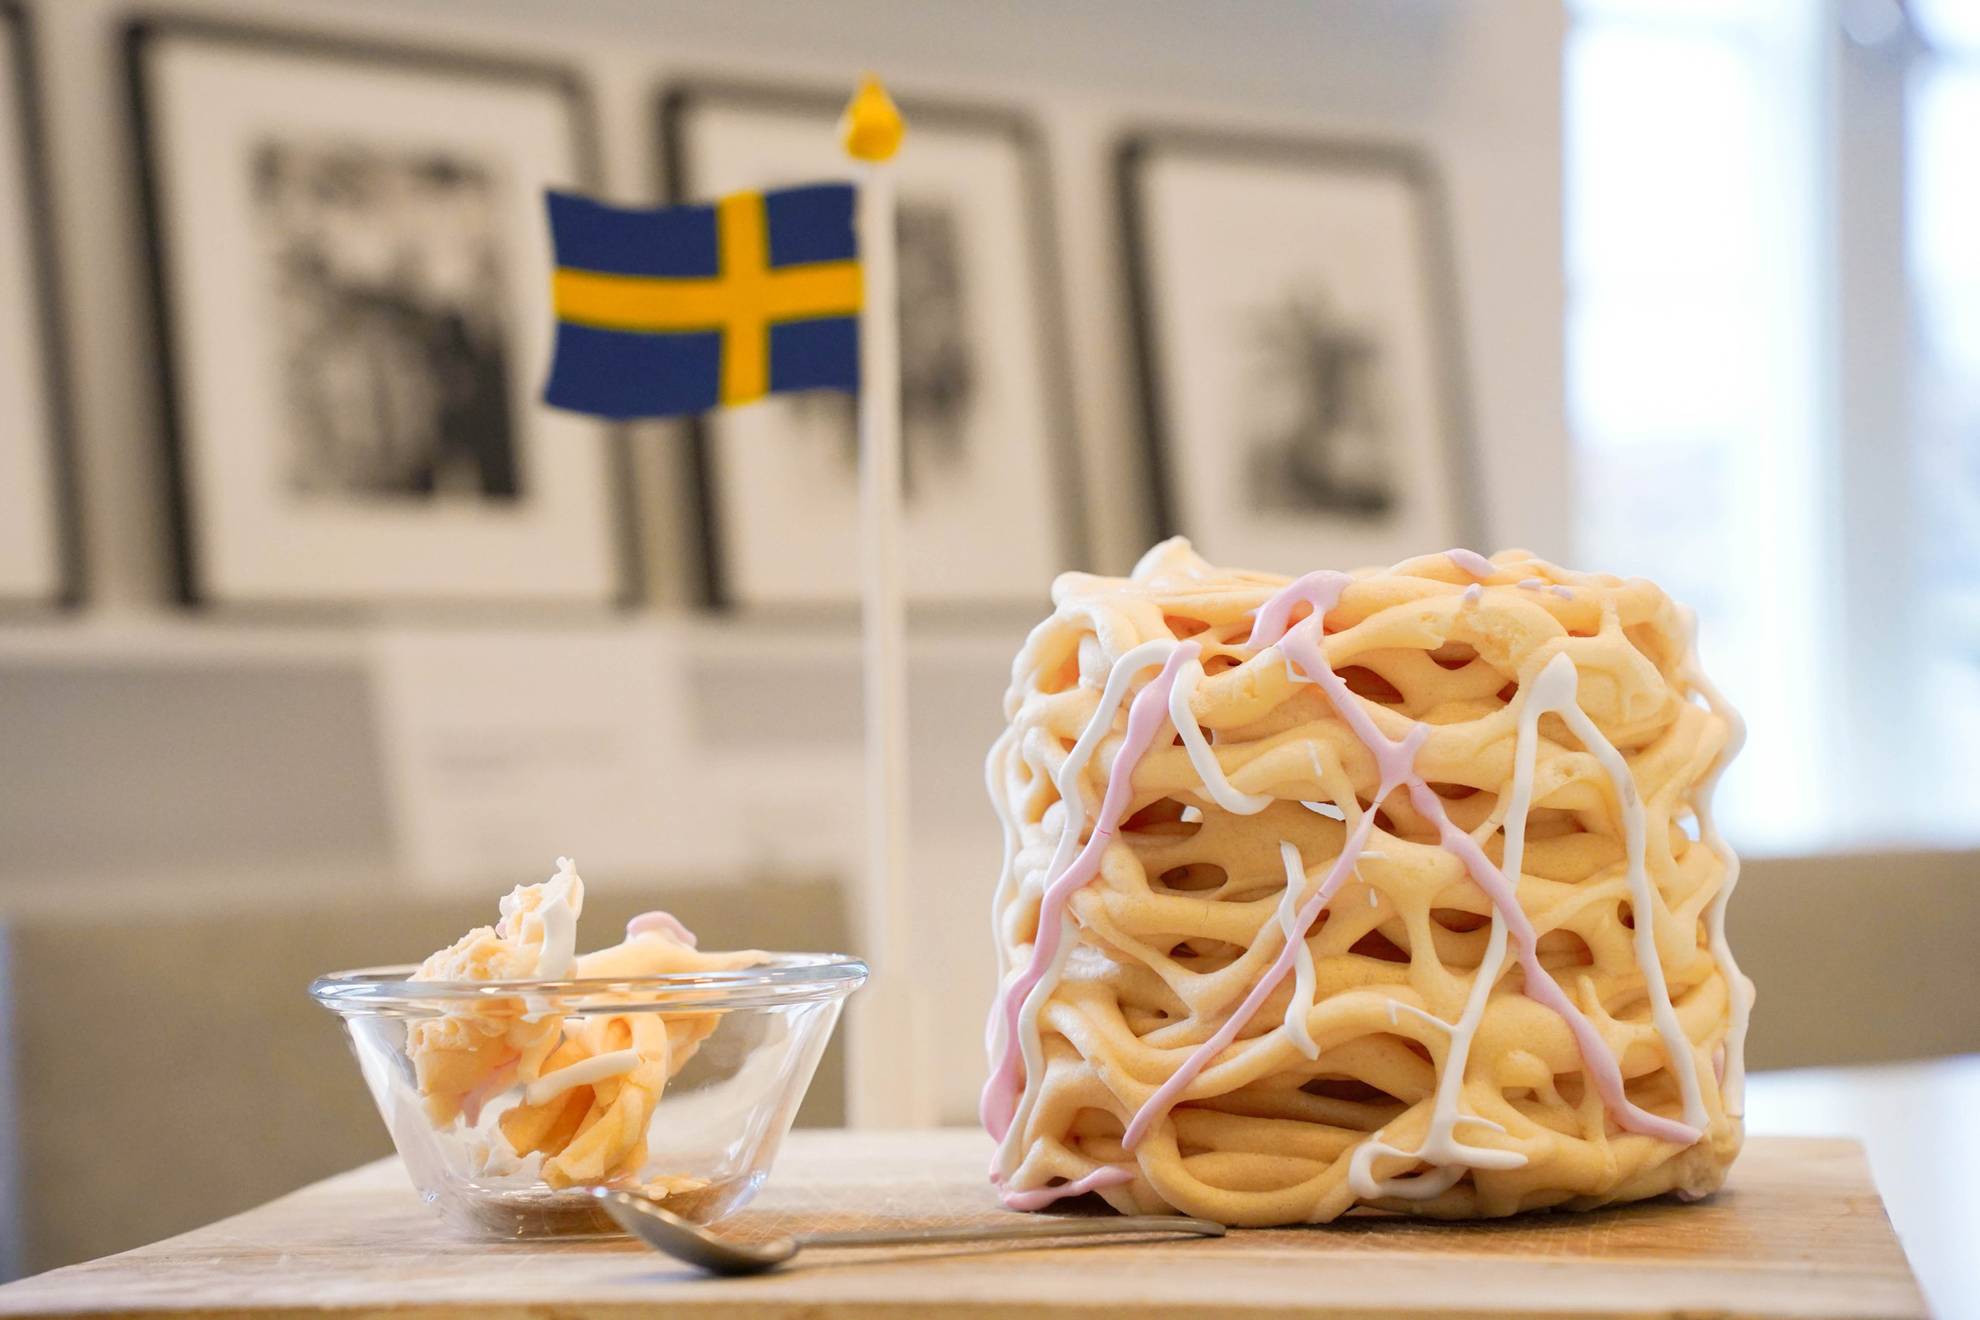 A "Spettekaka" with a bowl and a swedish flag.